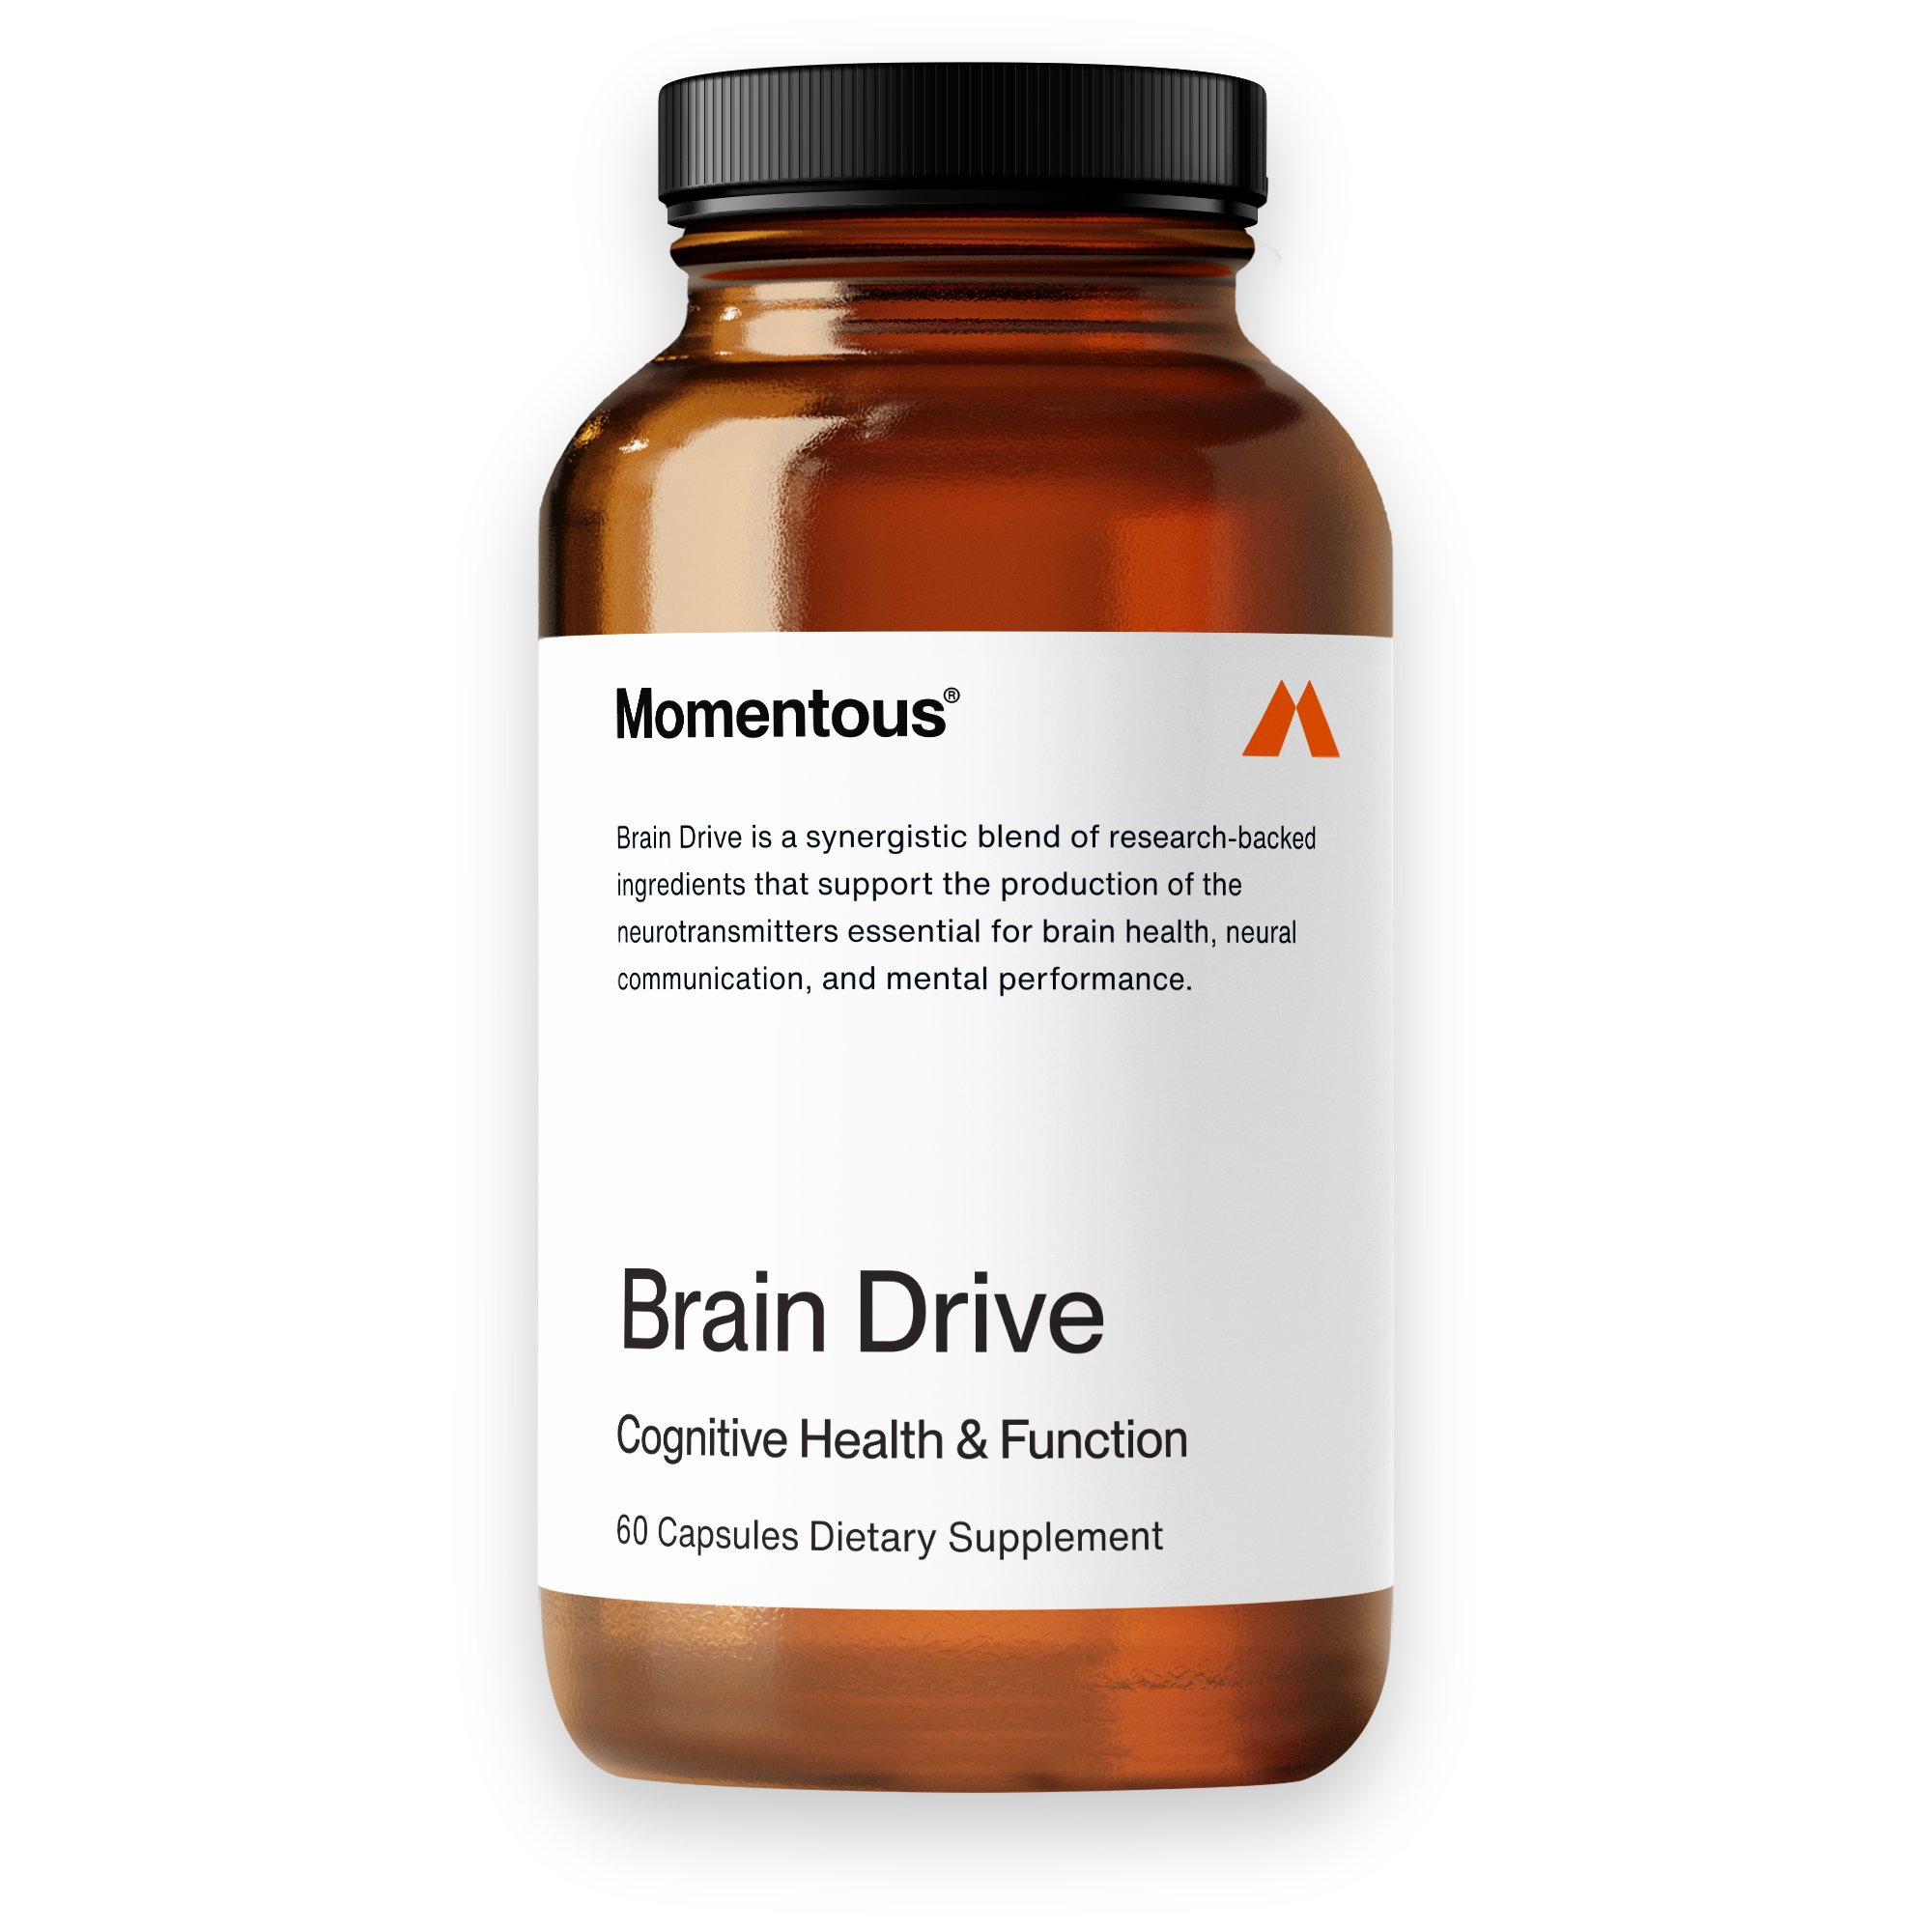 Cognitive function and brain health supplements